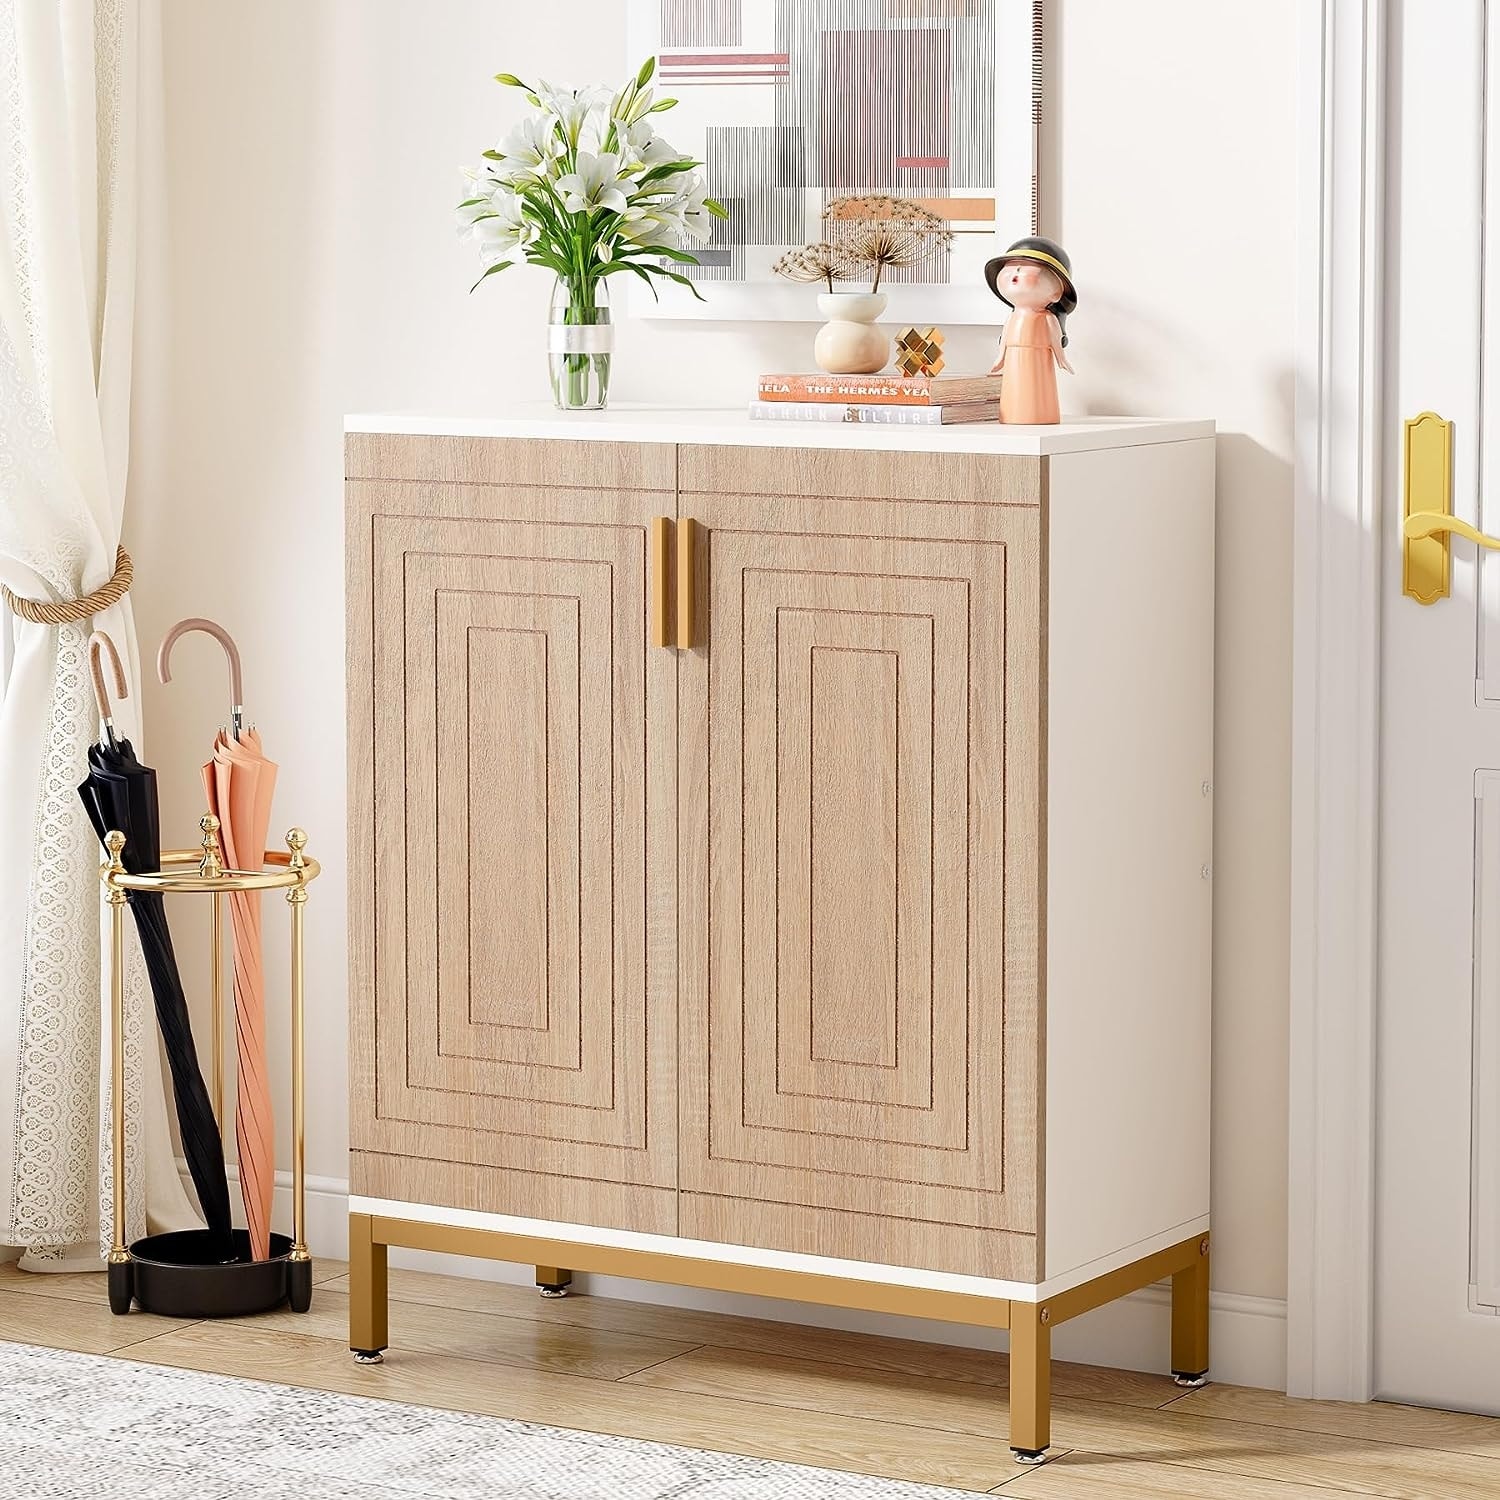 https://ak1.ostkcdn.com/images/products/is/images/direct/1ded8238c91a3612941963151fb83febdda2f90d/20-Pairs-Shoe-Storage-Cabinet-for-Entryway%2C-Freestanding-Shoe-Rack-Organizer.jpg